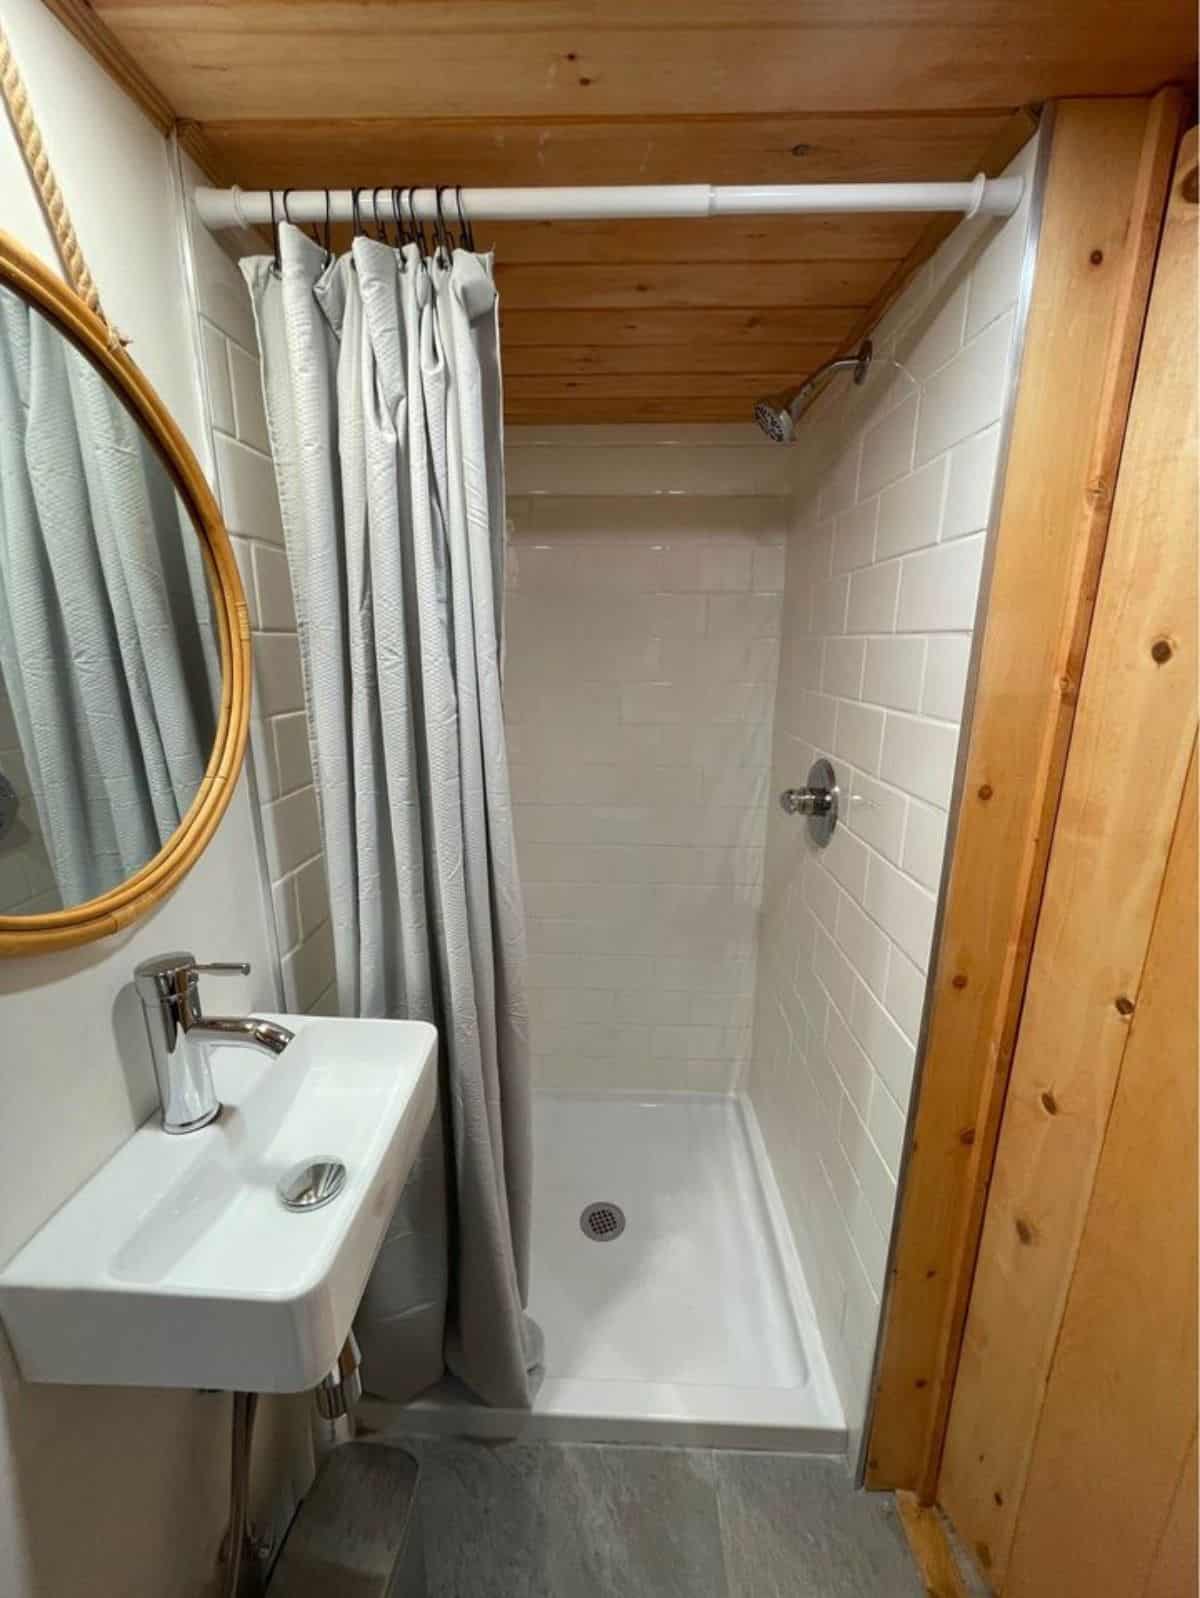 Sink with mirror and separate shower area in bathroom